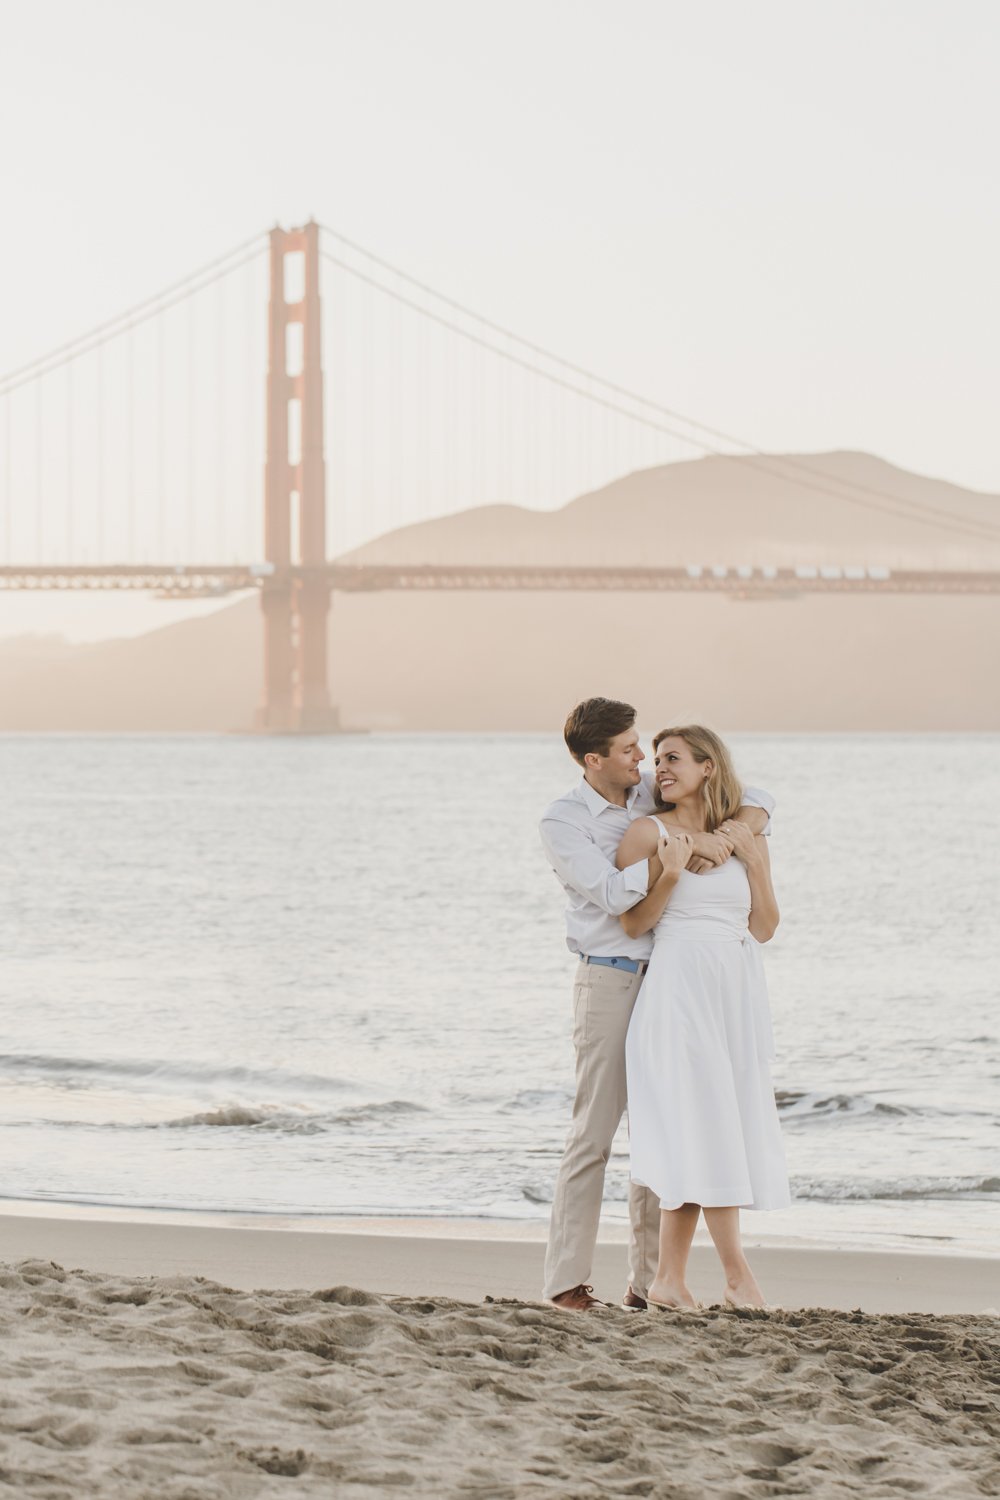 Crissy Fields, San Francisco Beach Engagement Photography Session 